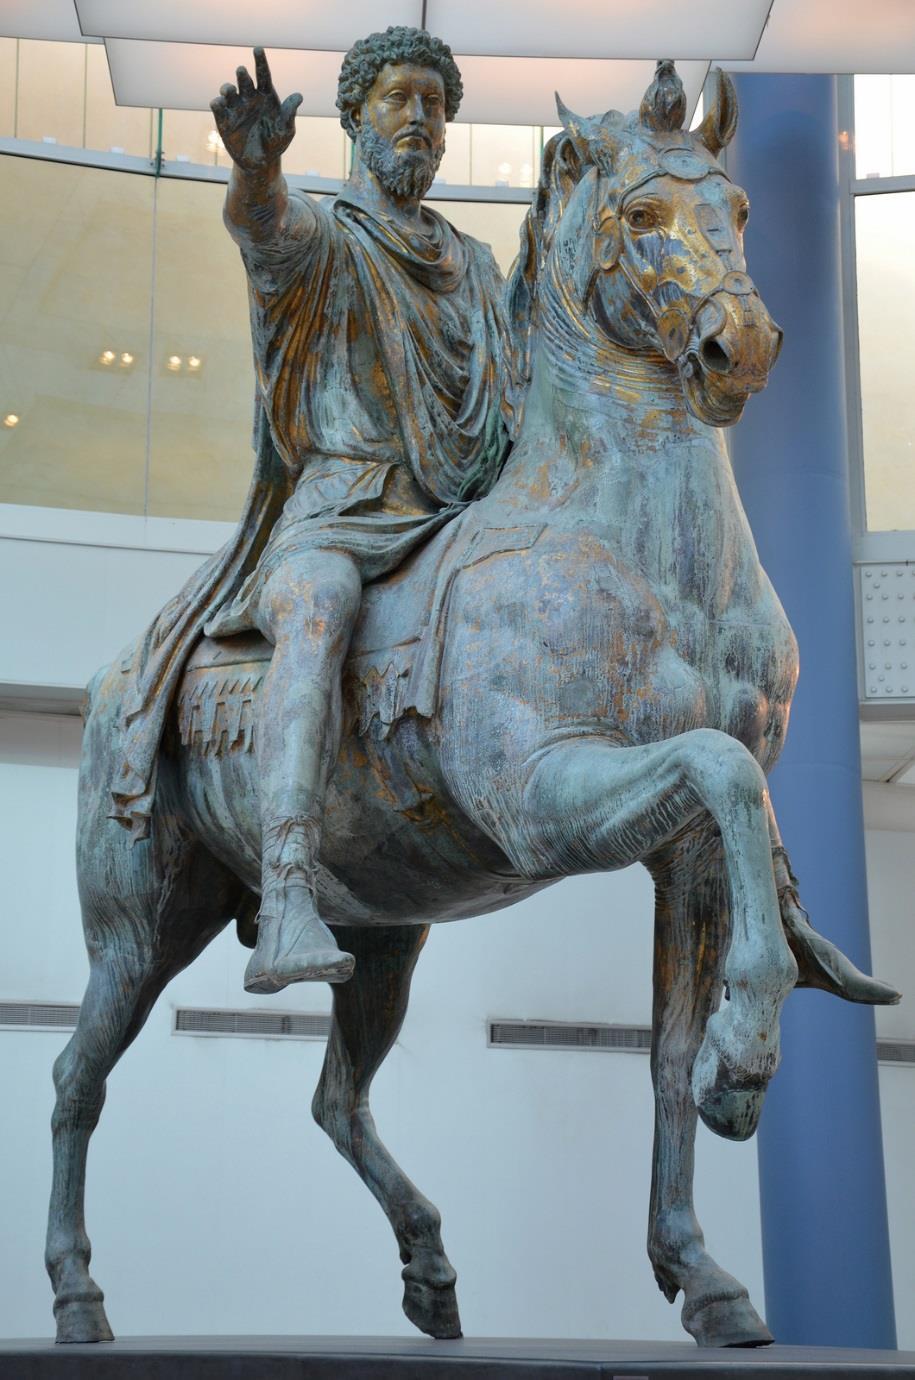 From the Latin "eques", meaning "knight", deriving from "equus", meaning "horse".